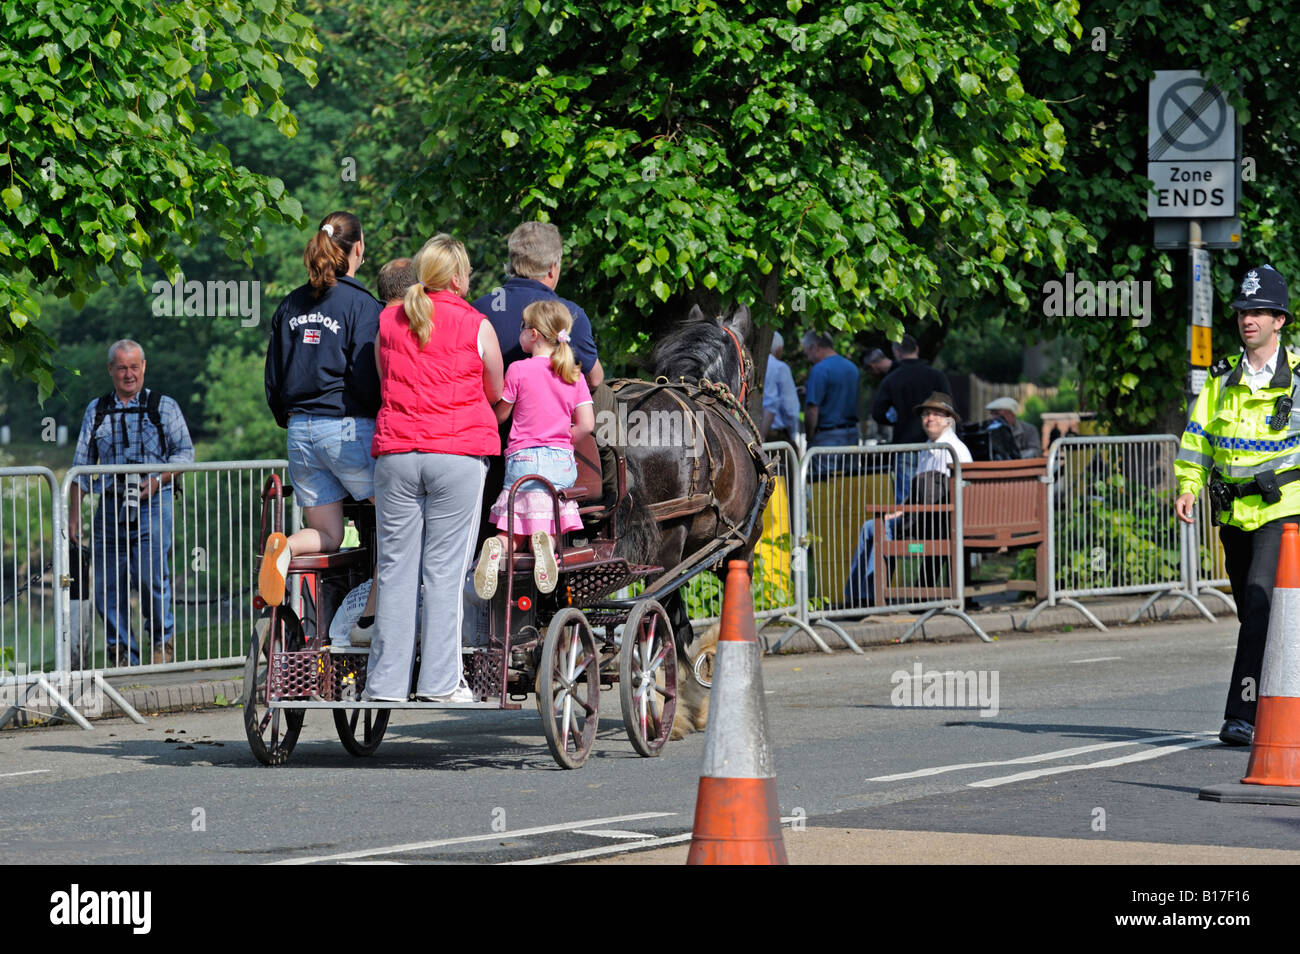 Gypsy travellers with horse and trap. Appleby Horse Fair. Appleby-in-Westmorland, Cumbria, England, United Kingdom. Stock Photo